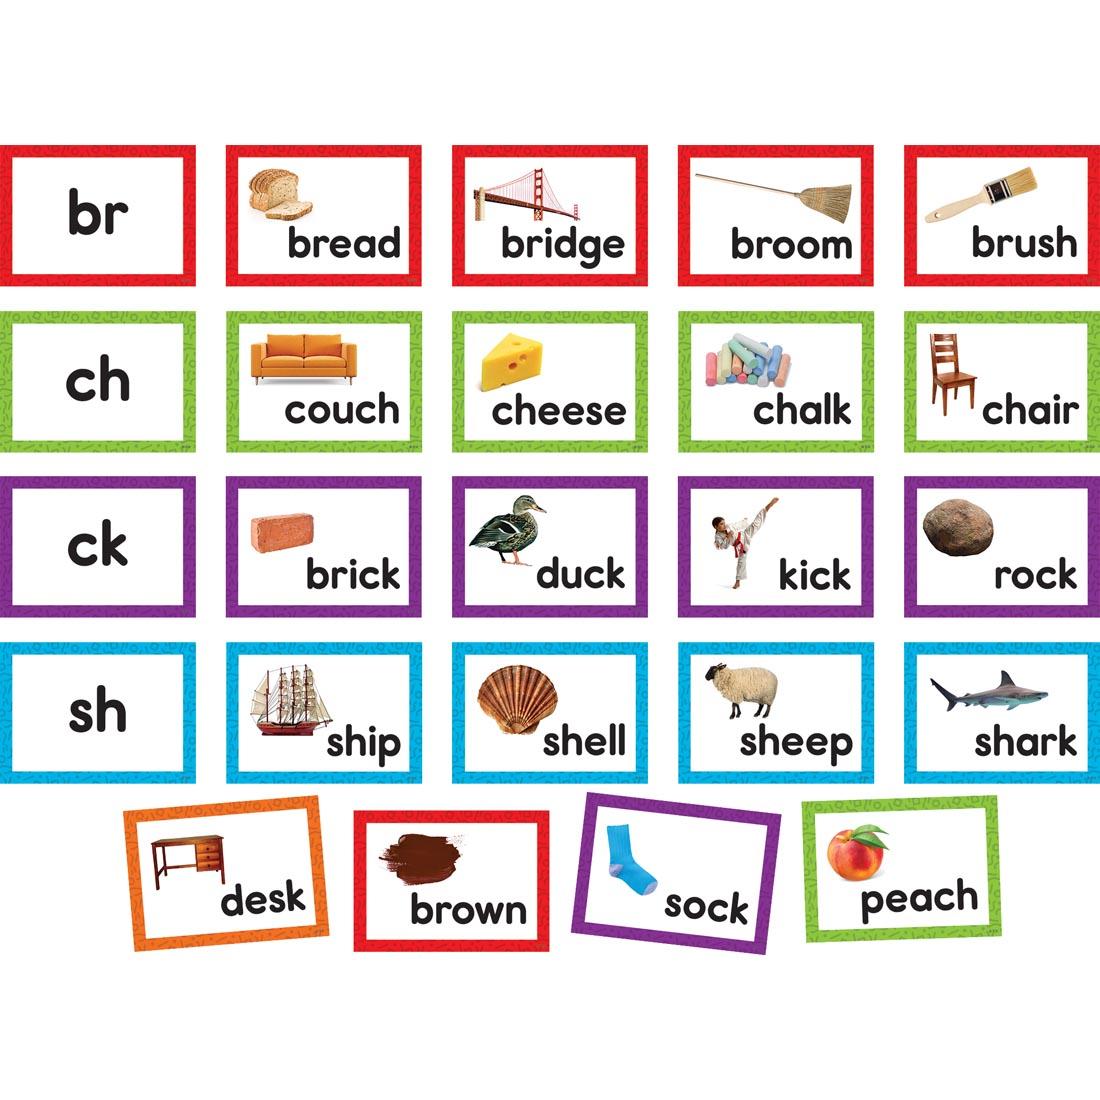 Consonant Blends And Digraphs Pocket Chart Cards By Teacher Created Resources